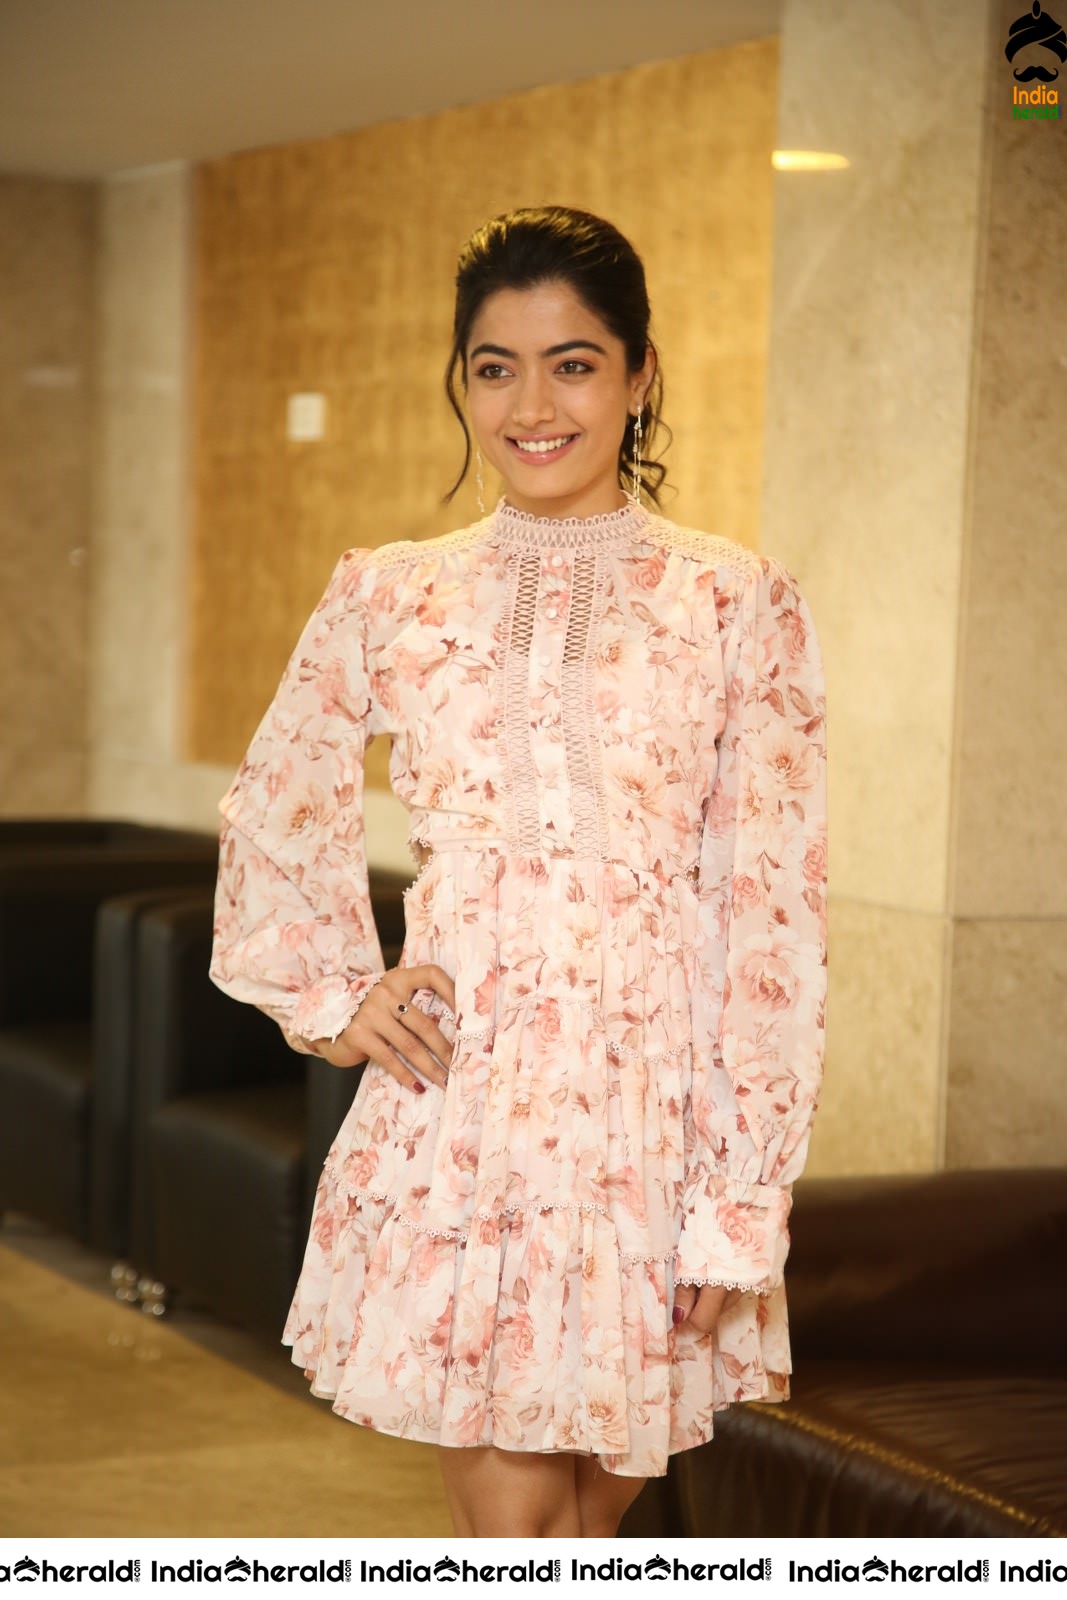 Rashmika Mandanna is just too pretty to handle in these photos